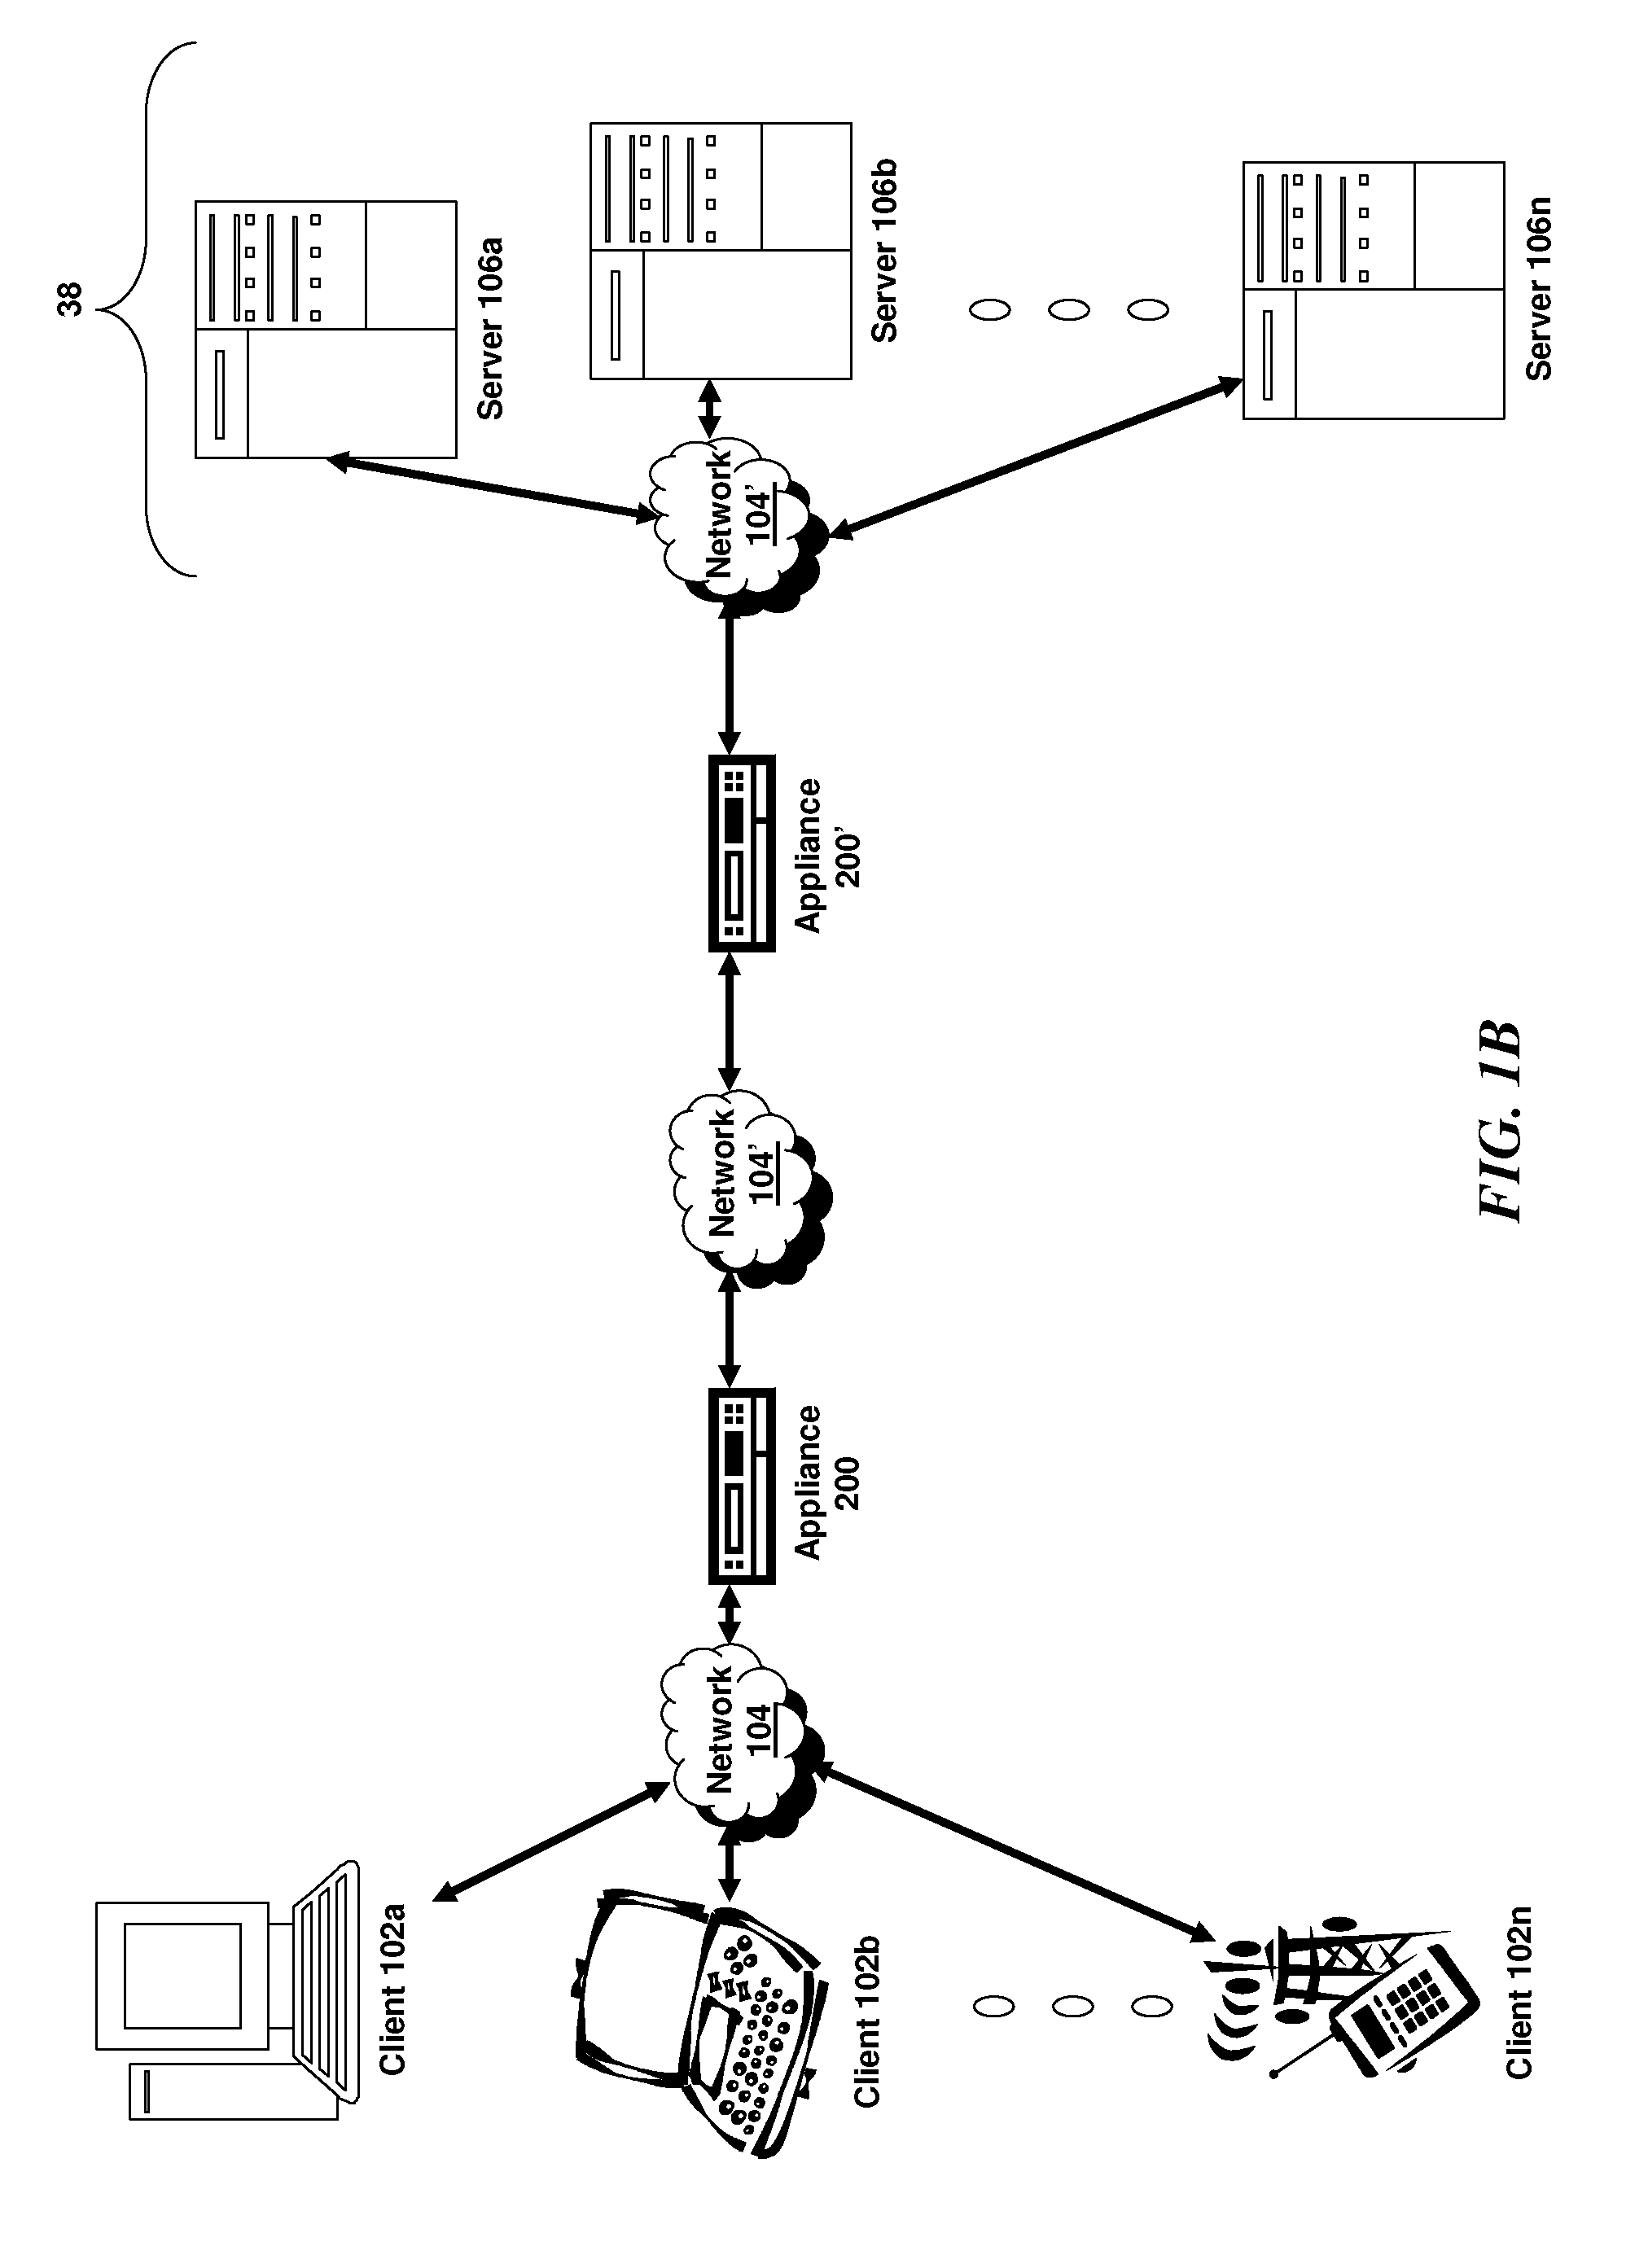 Systems and methods for distributed hash table in a multi-core system